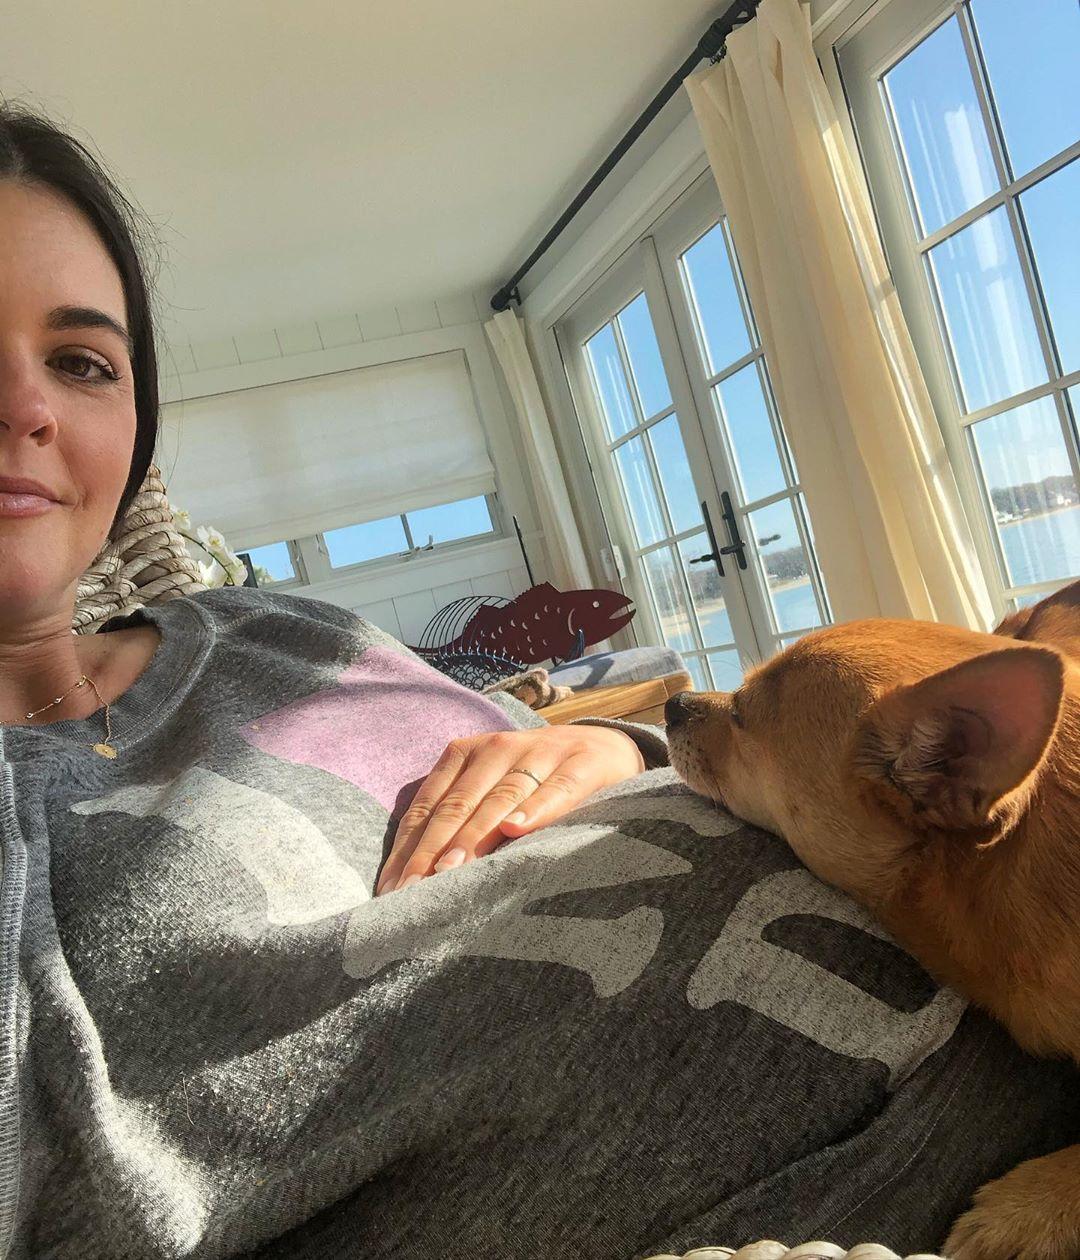 Where Does Katie Lee Live? Inside The Food Network Star's Home